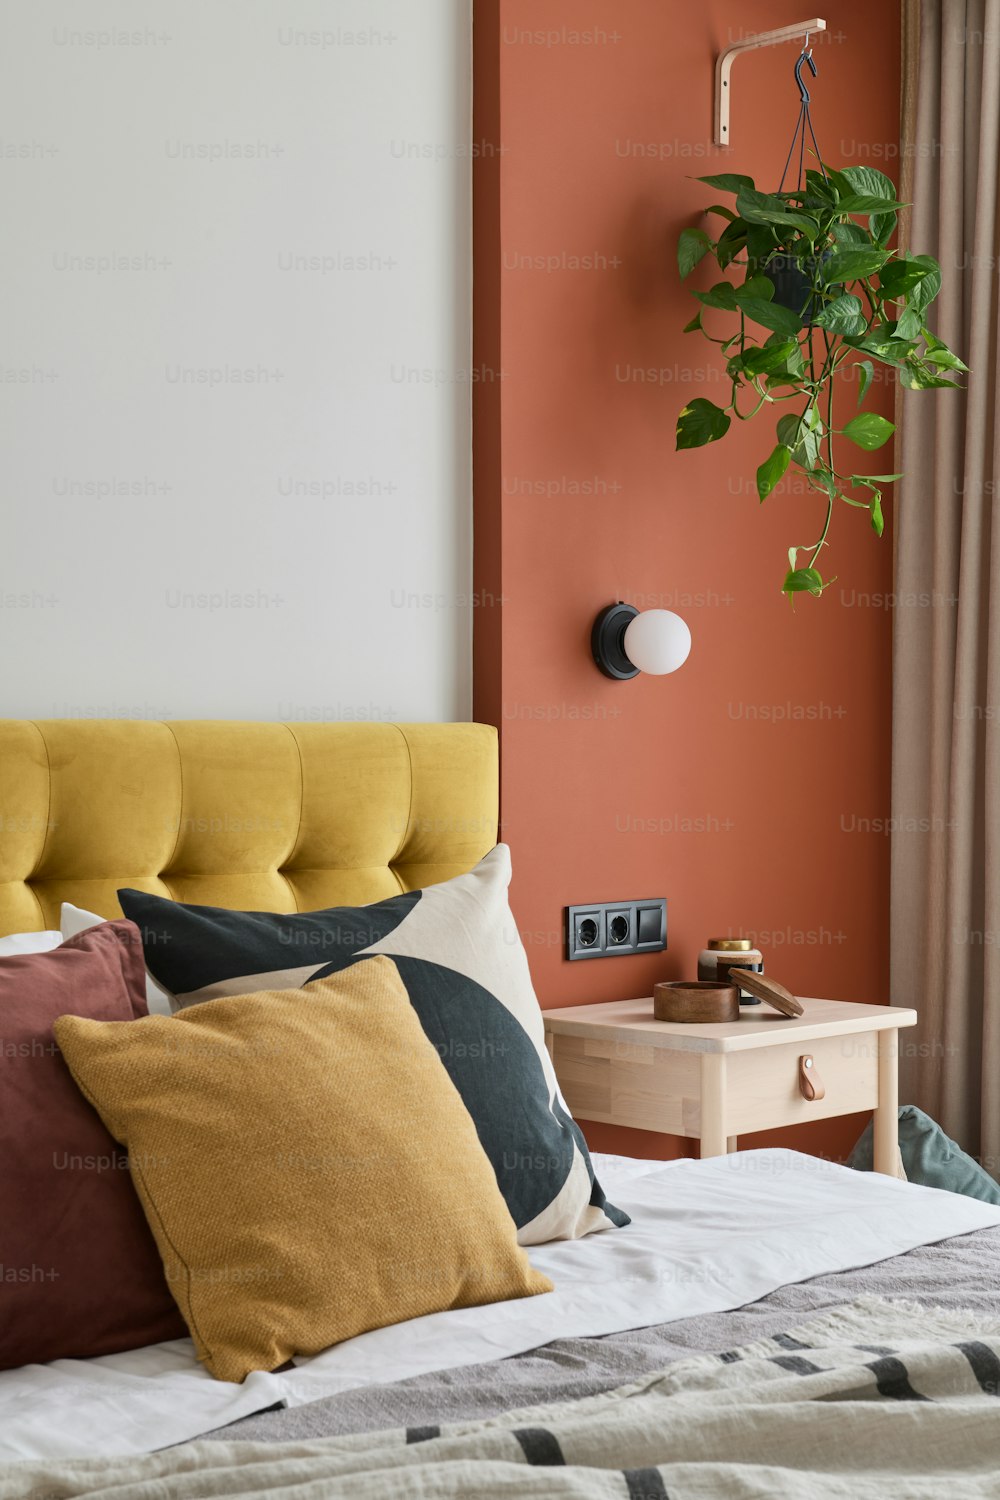 a bed with a yellow and orange pillow and a plant on the wall